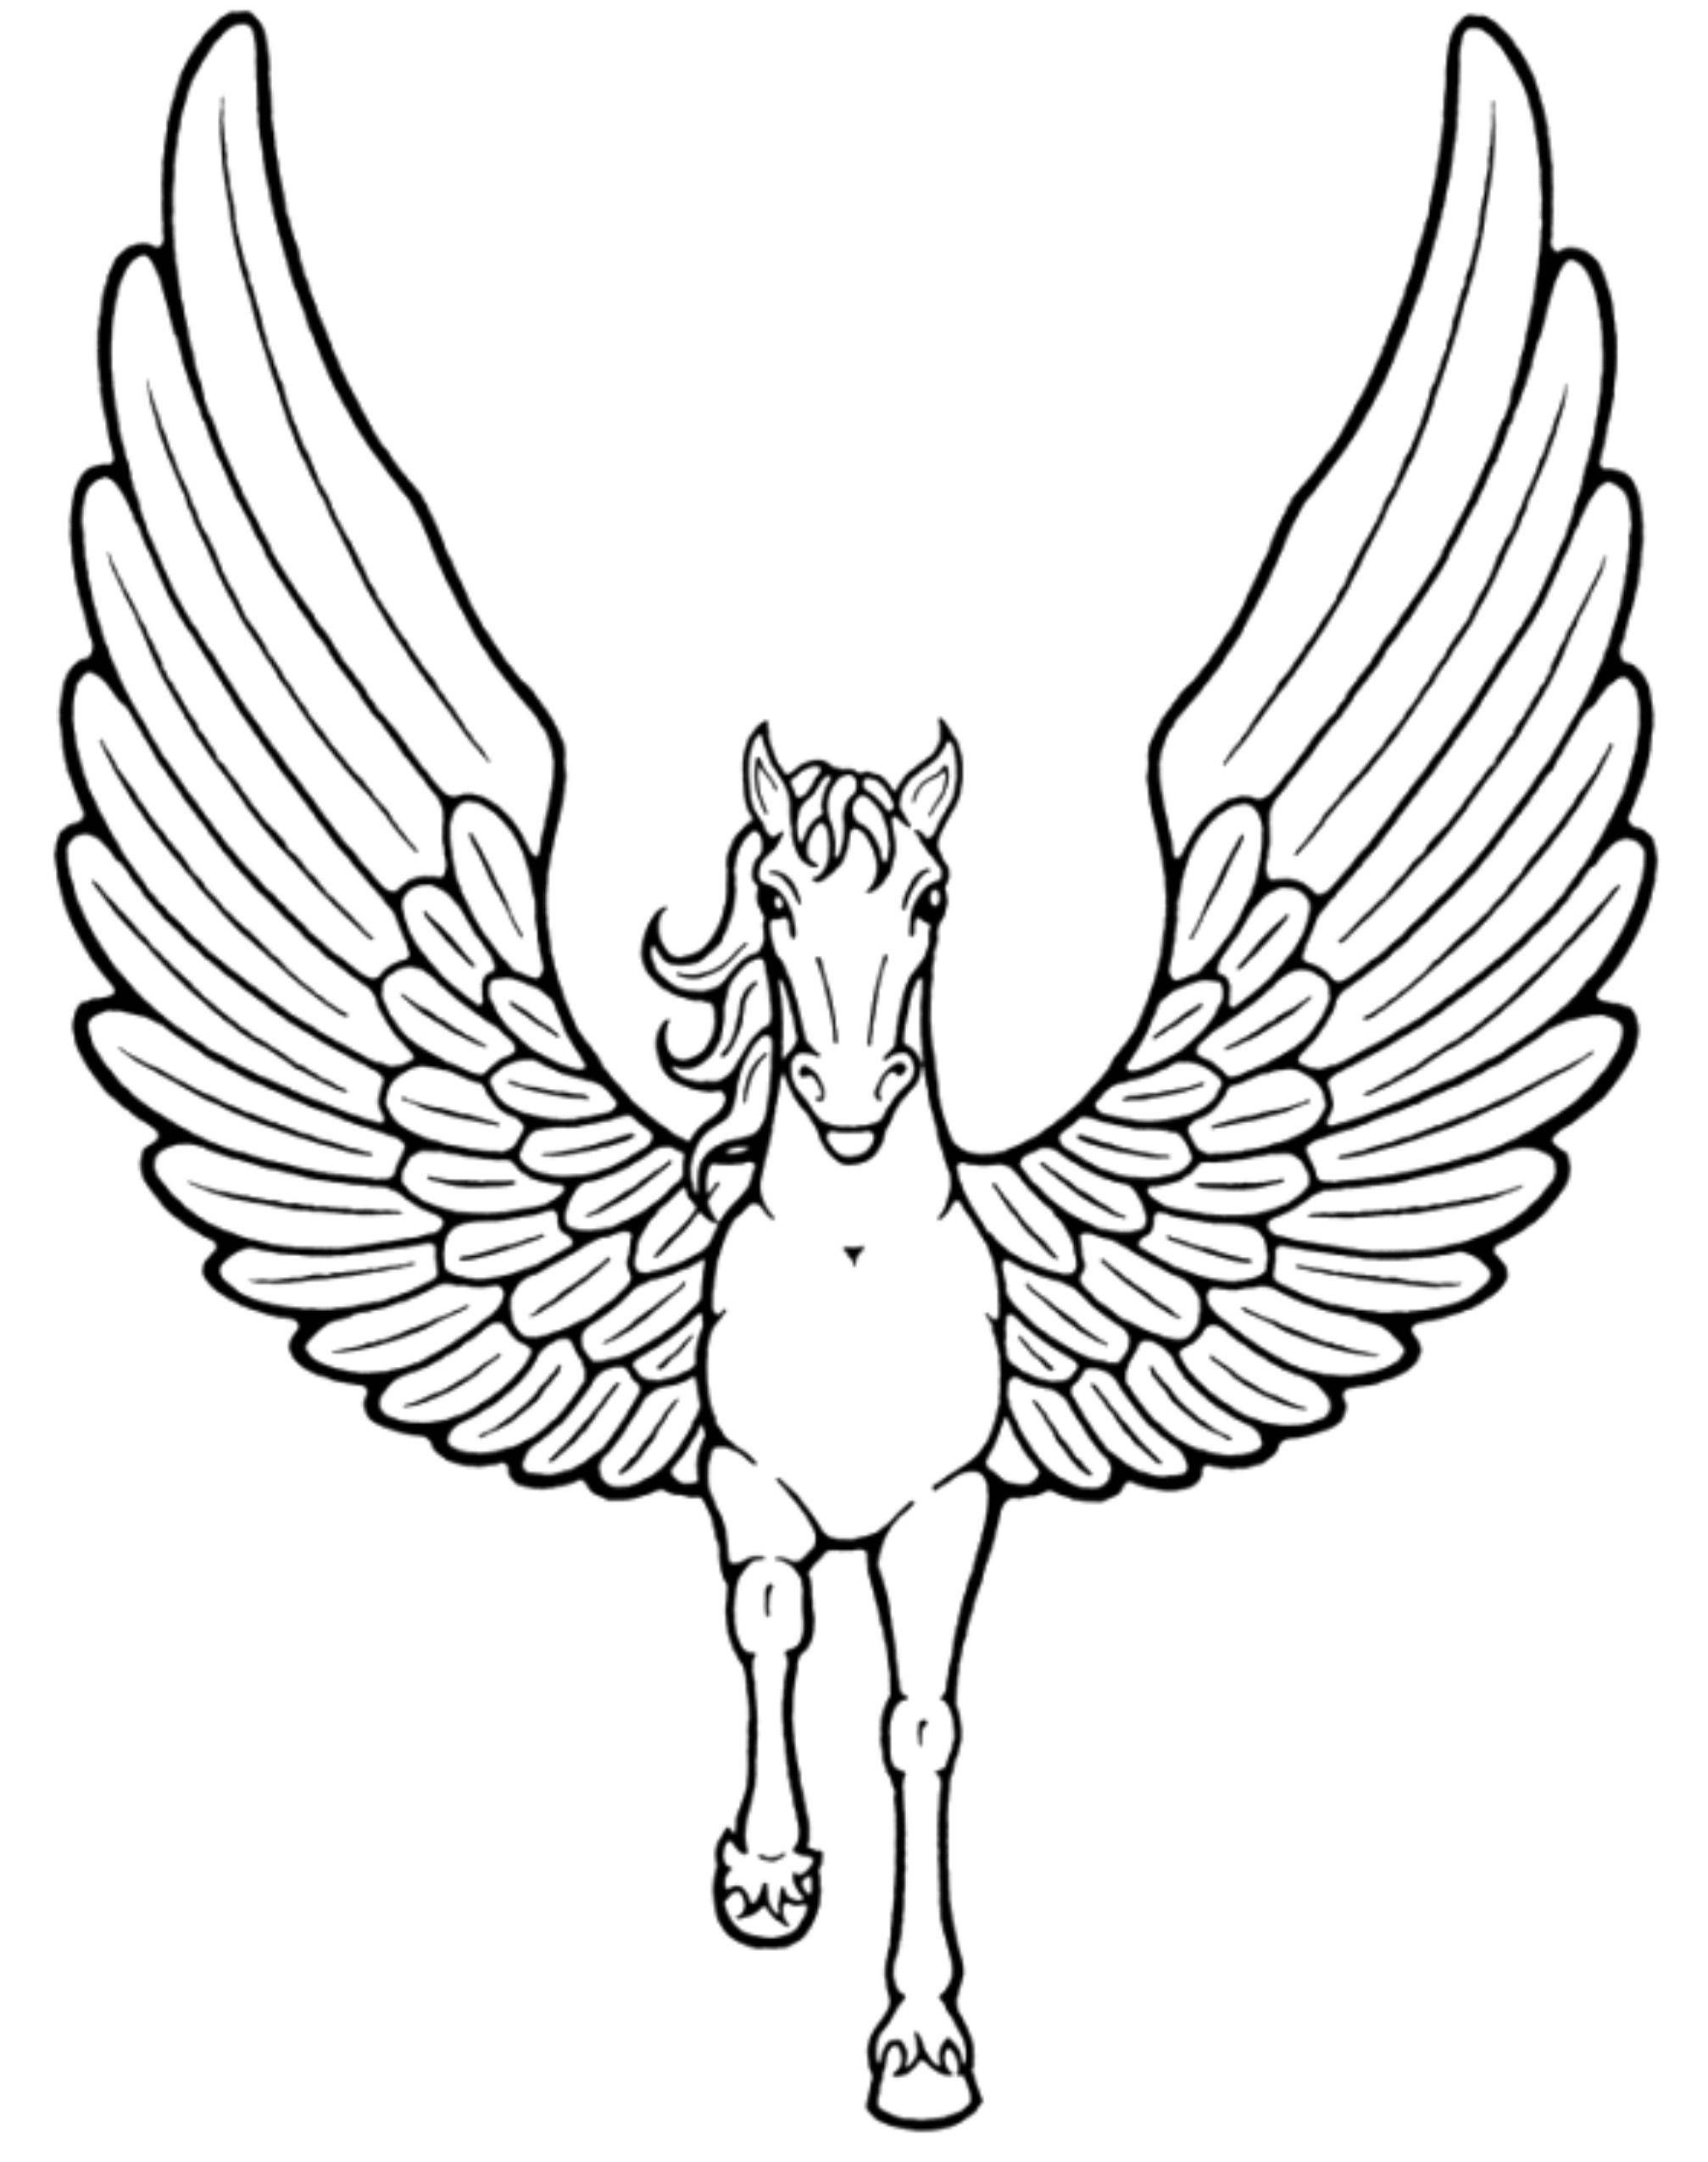 unicorn coloring pages free learning printable - unicorns coloring ...